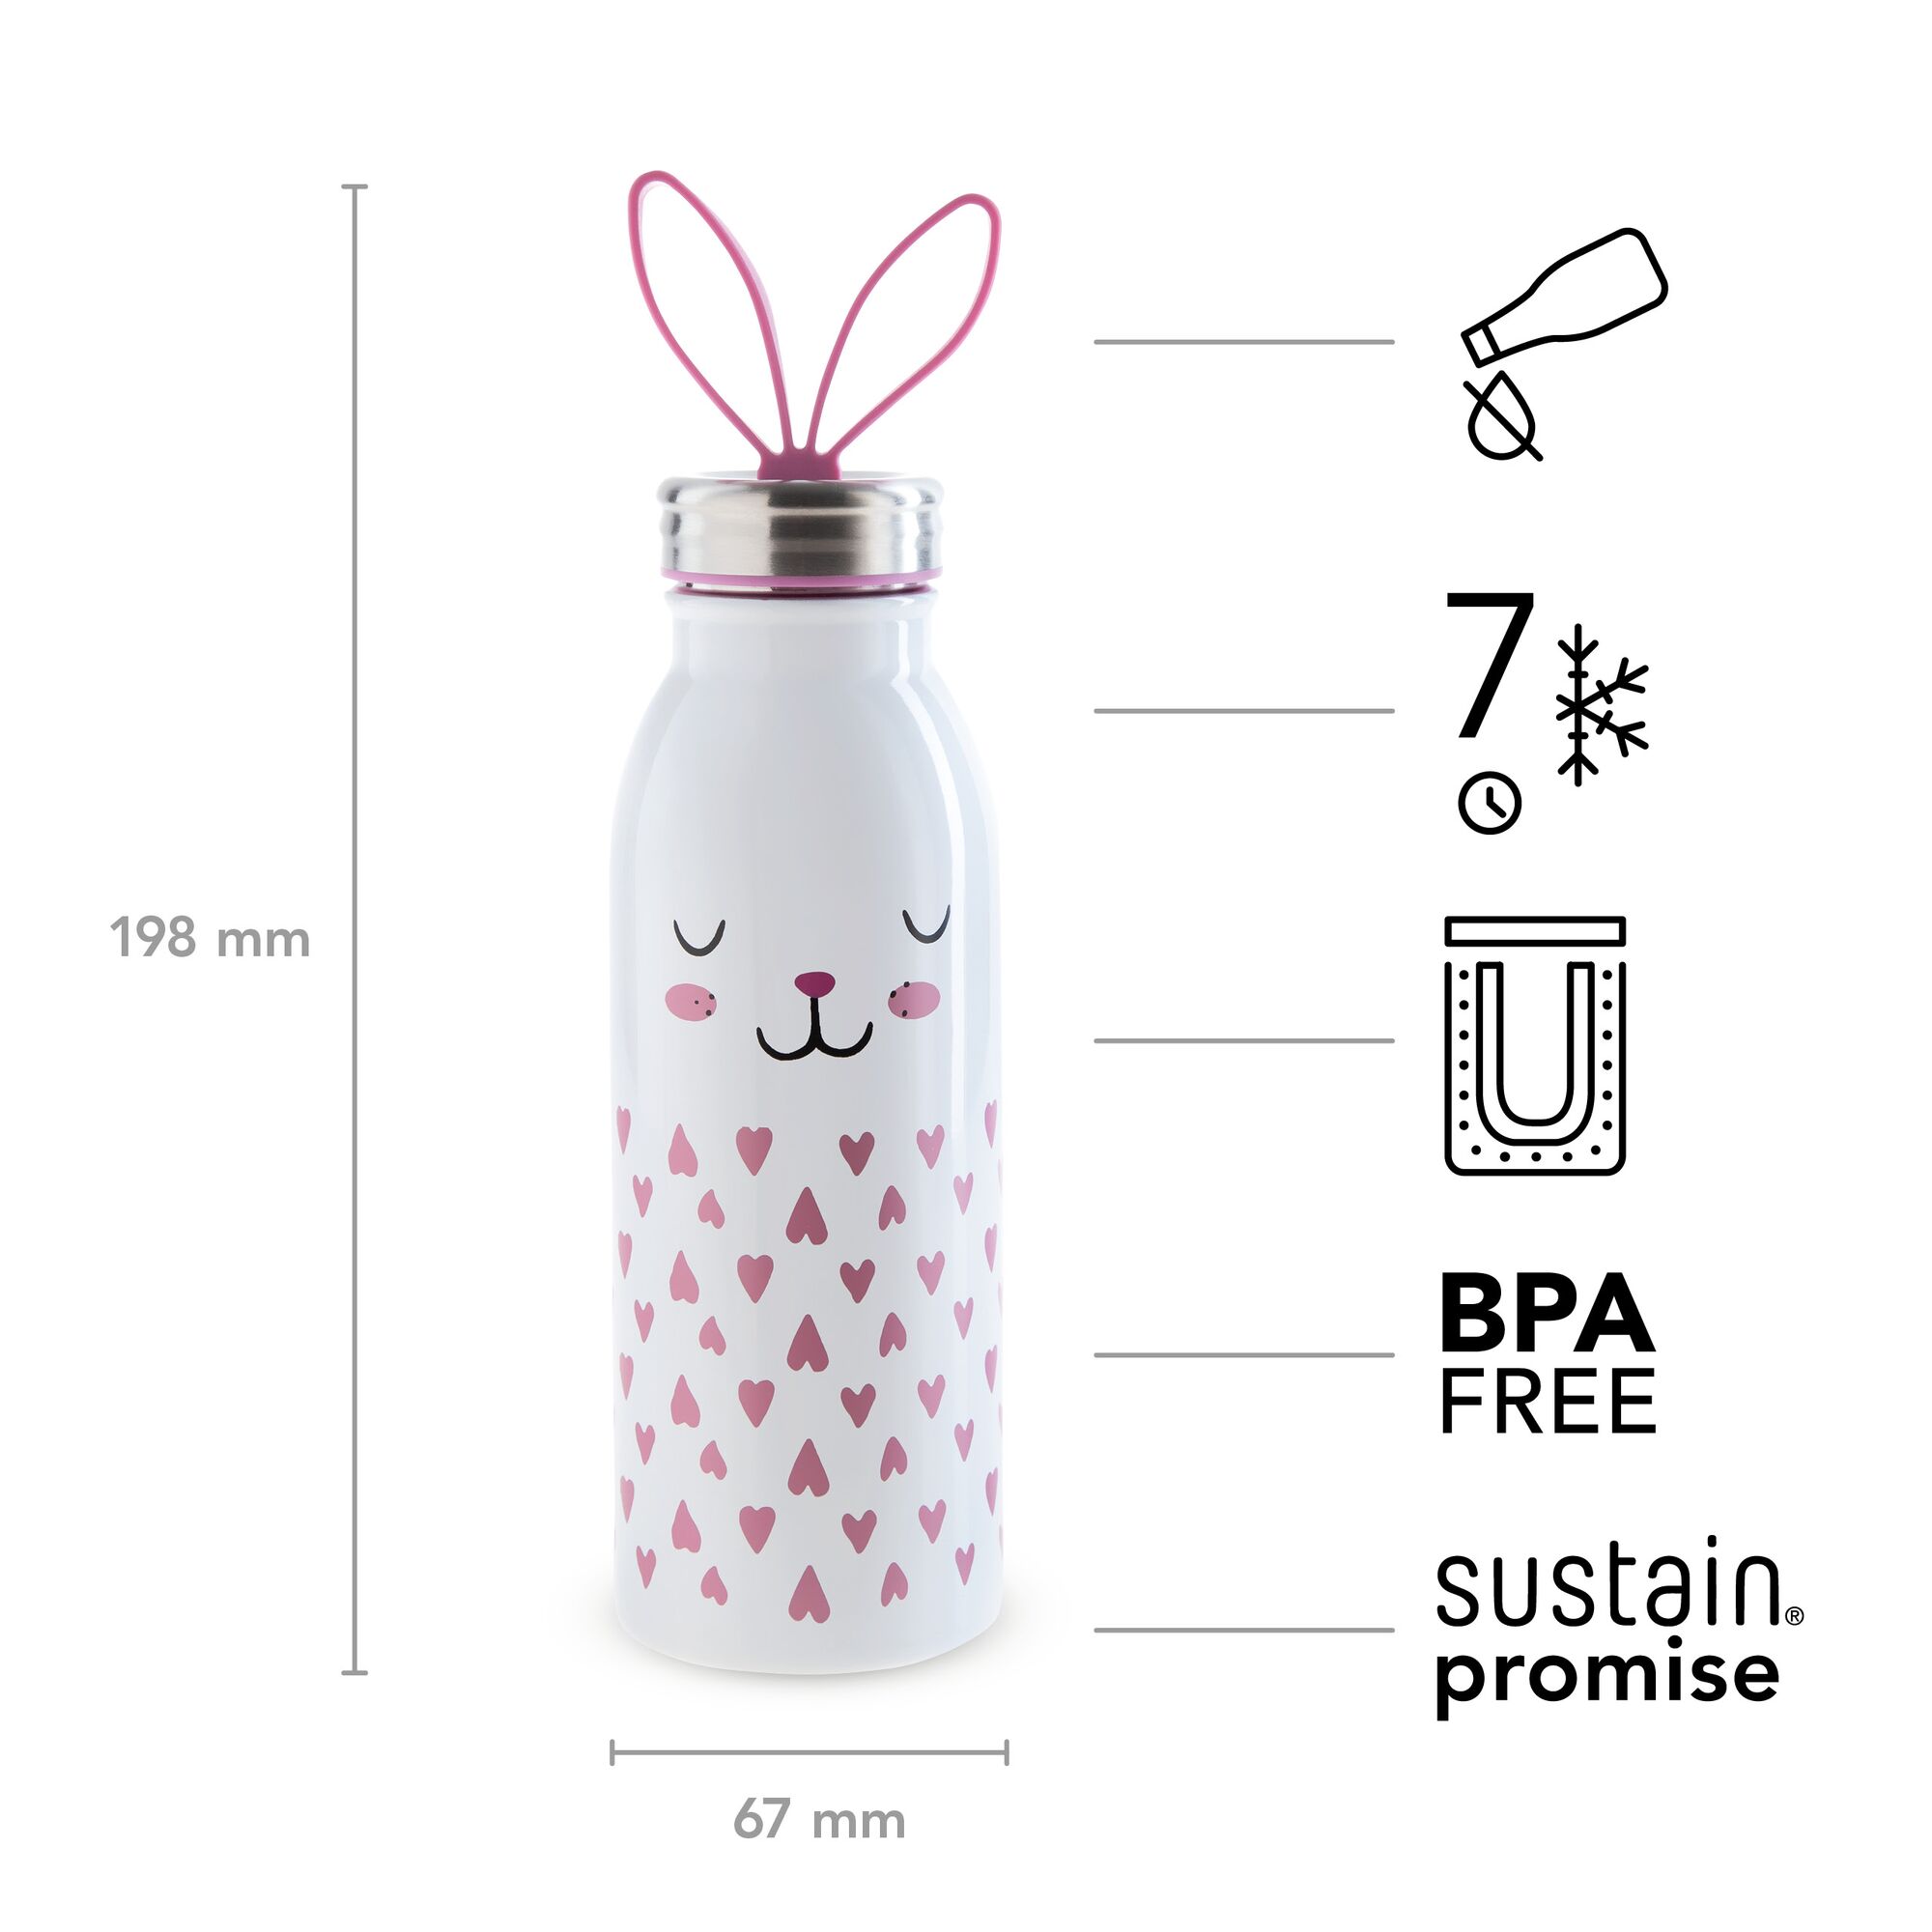 ALADDIN ZOO THERMAVAC WATER BOTTLE 430ML BUNNY 7 HRS COLD